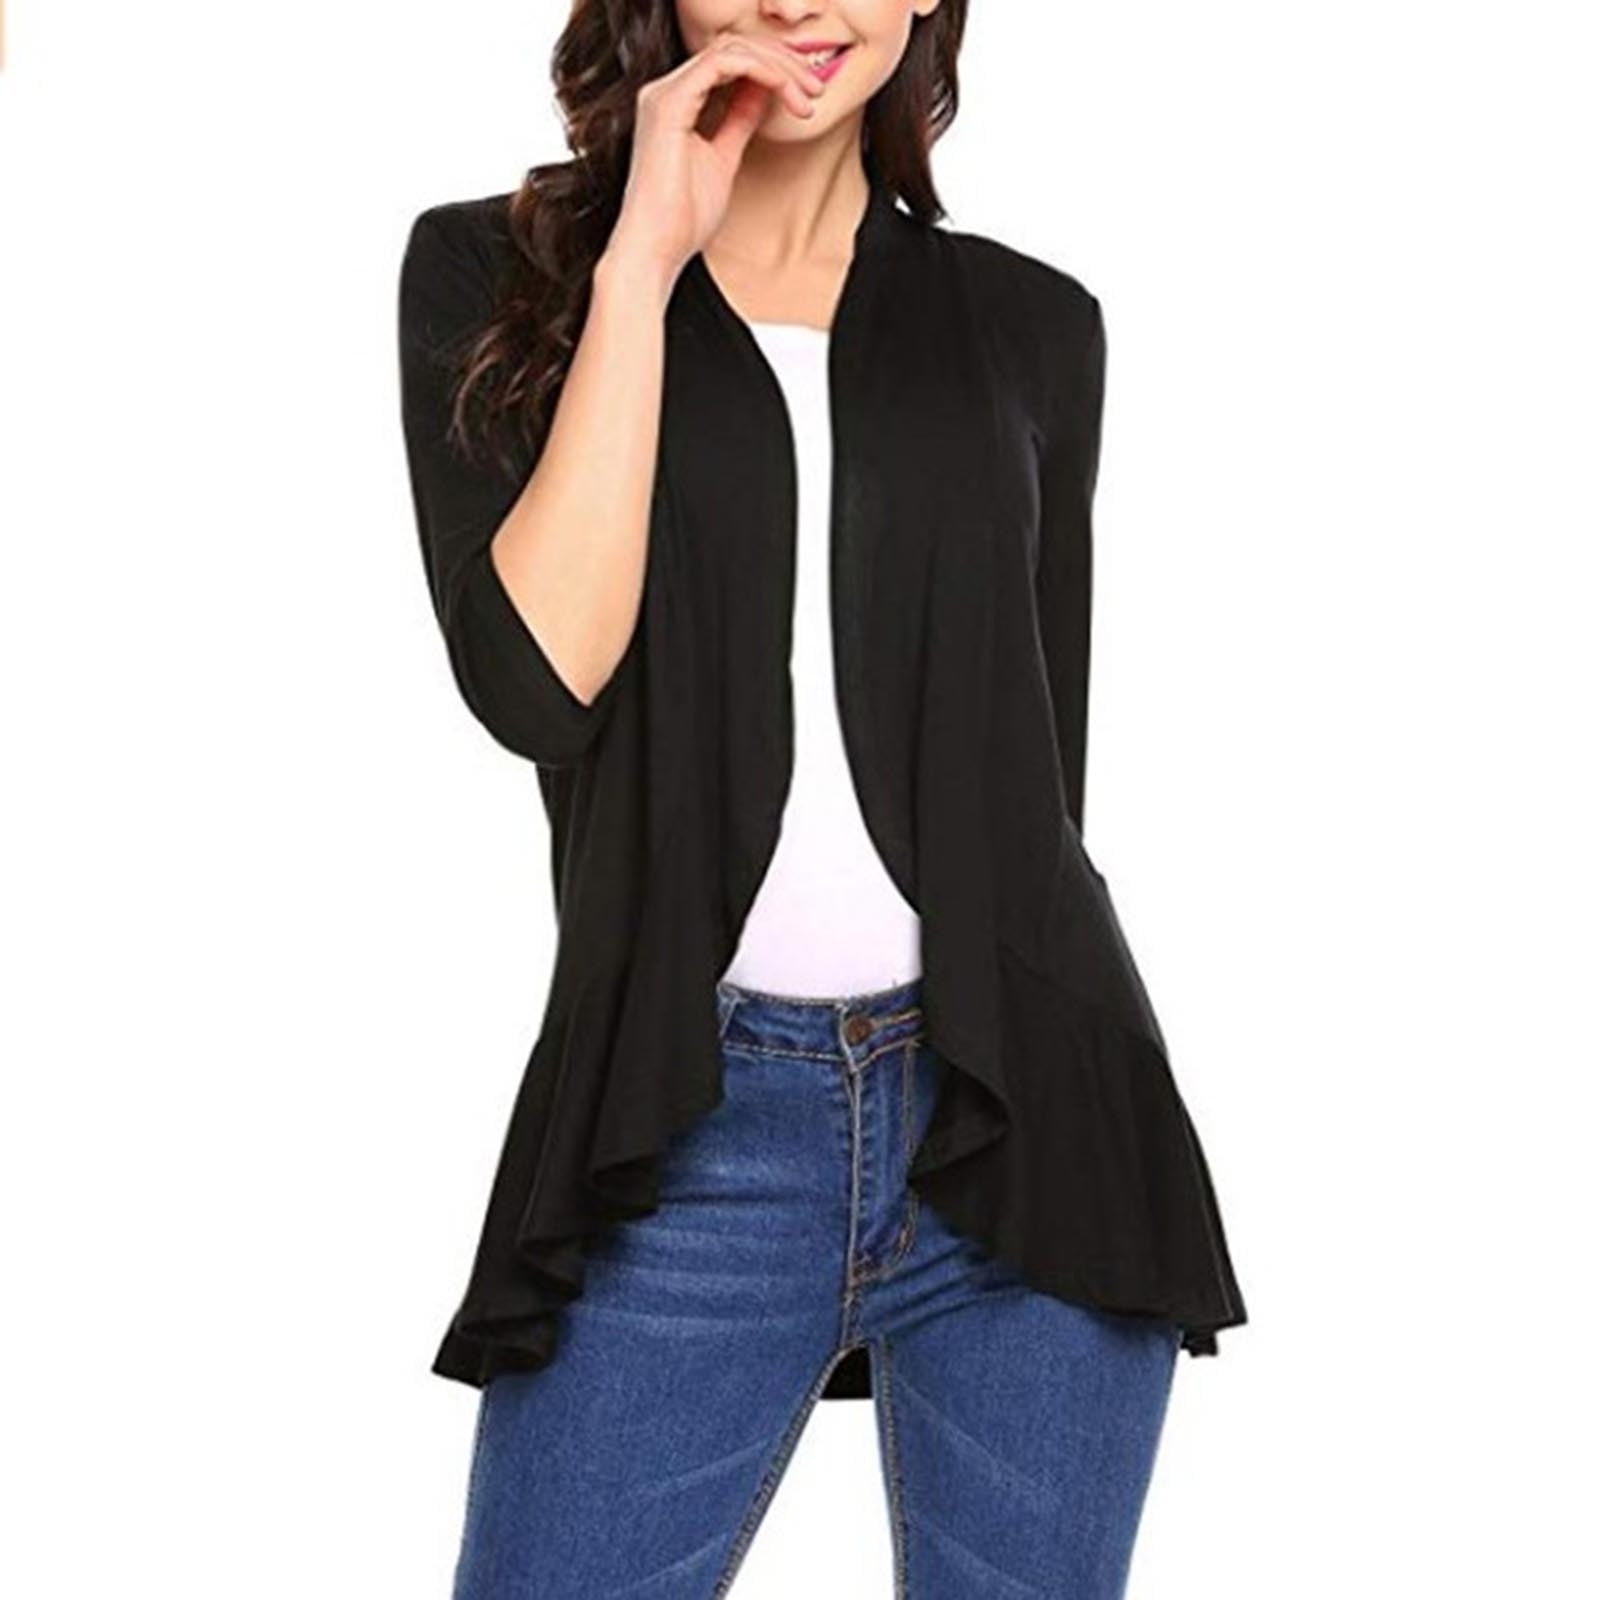 Black Long Cardigan for Women Lightweight Girls Cardigan Dressy Cover Ups  for Dresses White Womens Cardigans Lightweight Dollar General Work Shirt  Clothing for Women Sale Under 1 Dollar Items only at